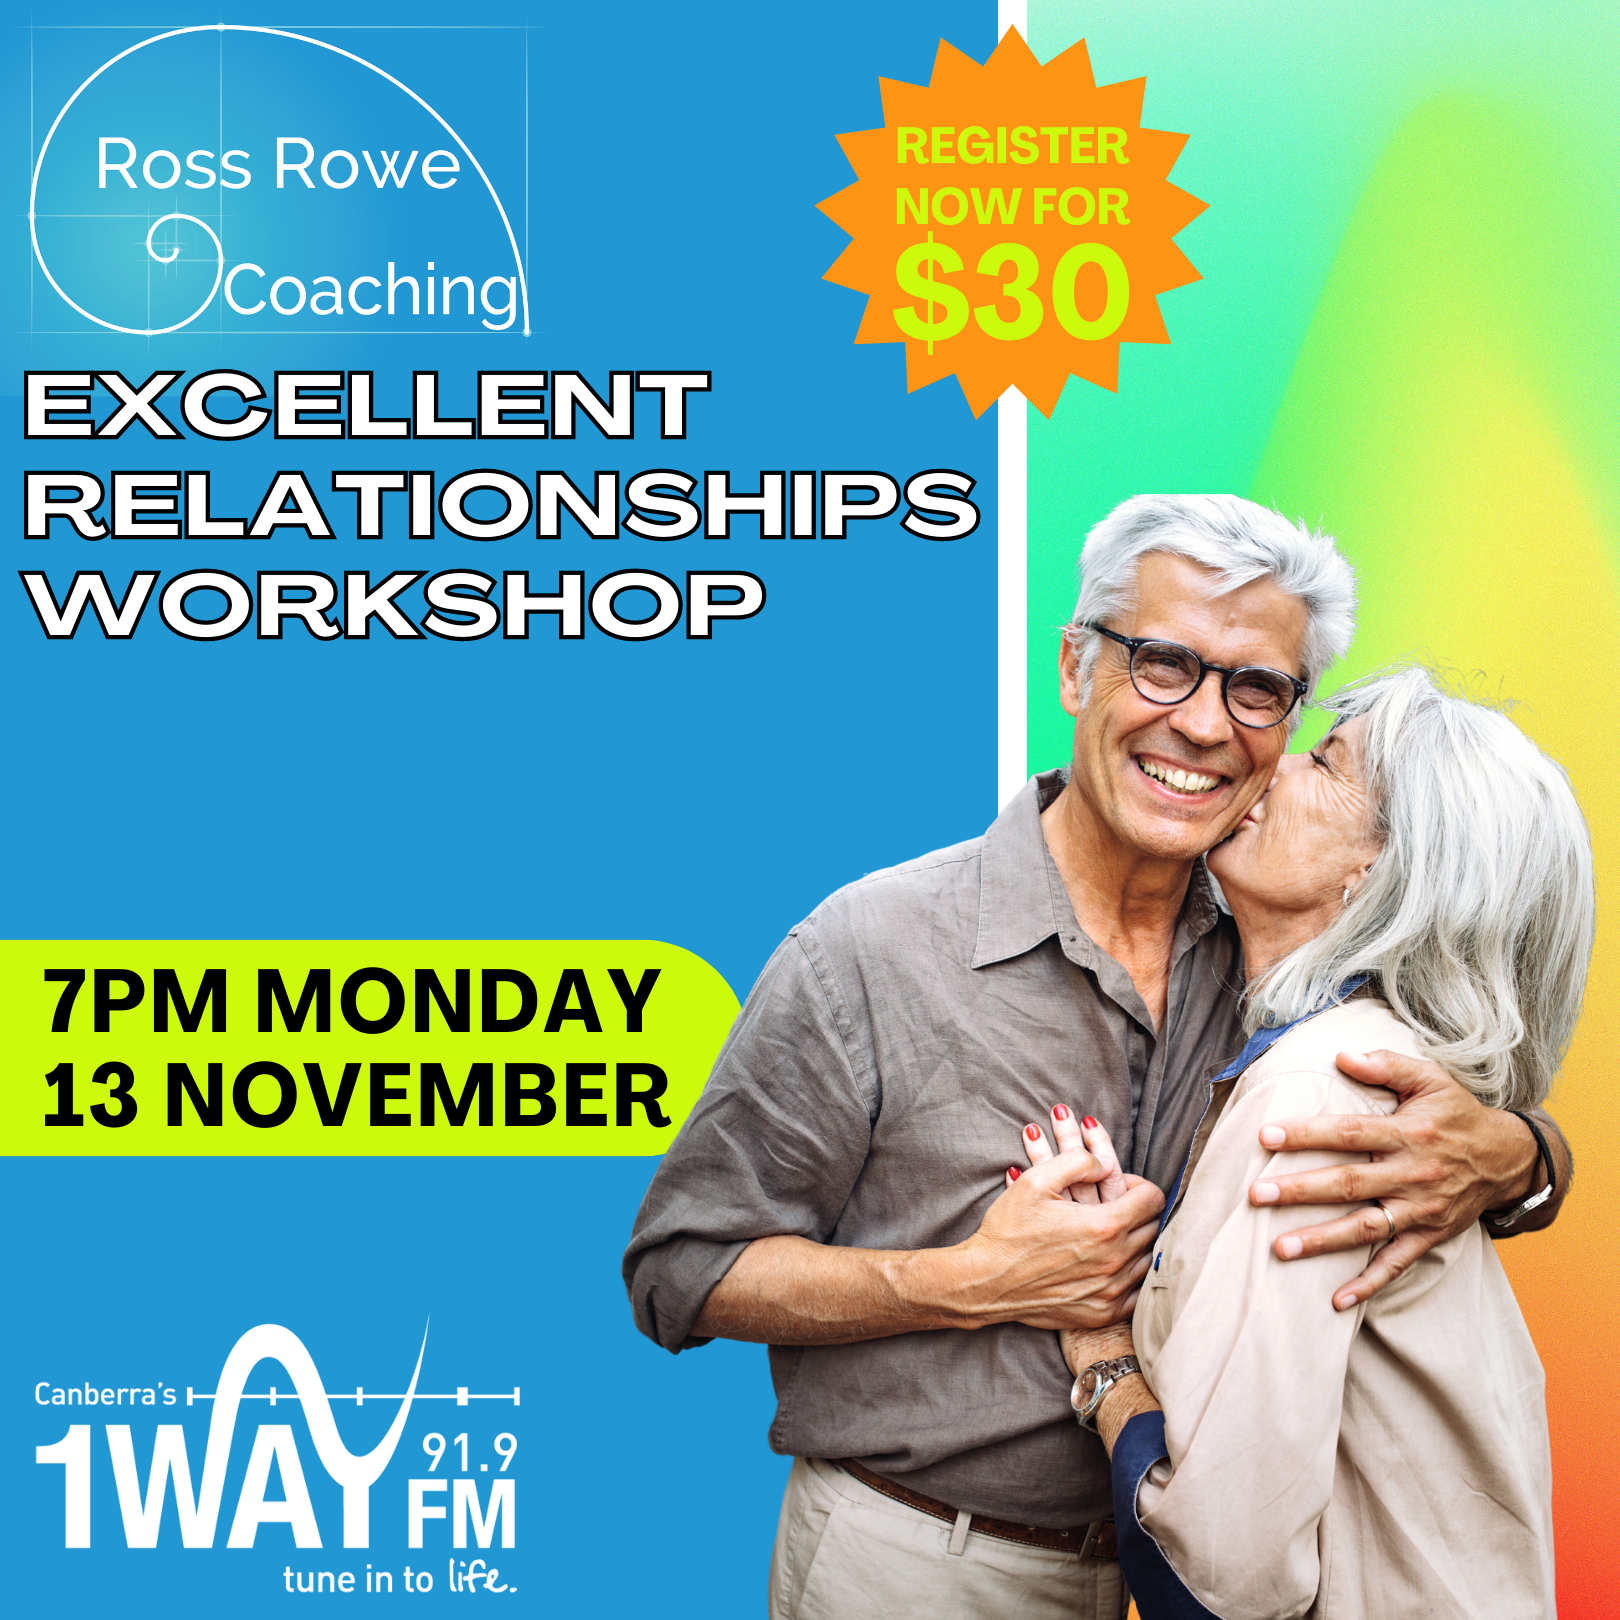 Ross Rowe Coaching Workshop - Exceptional Relationships